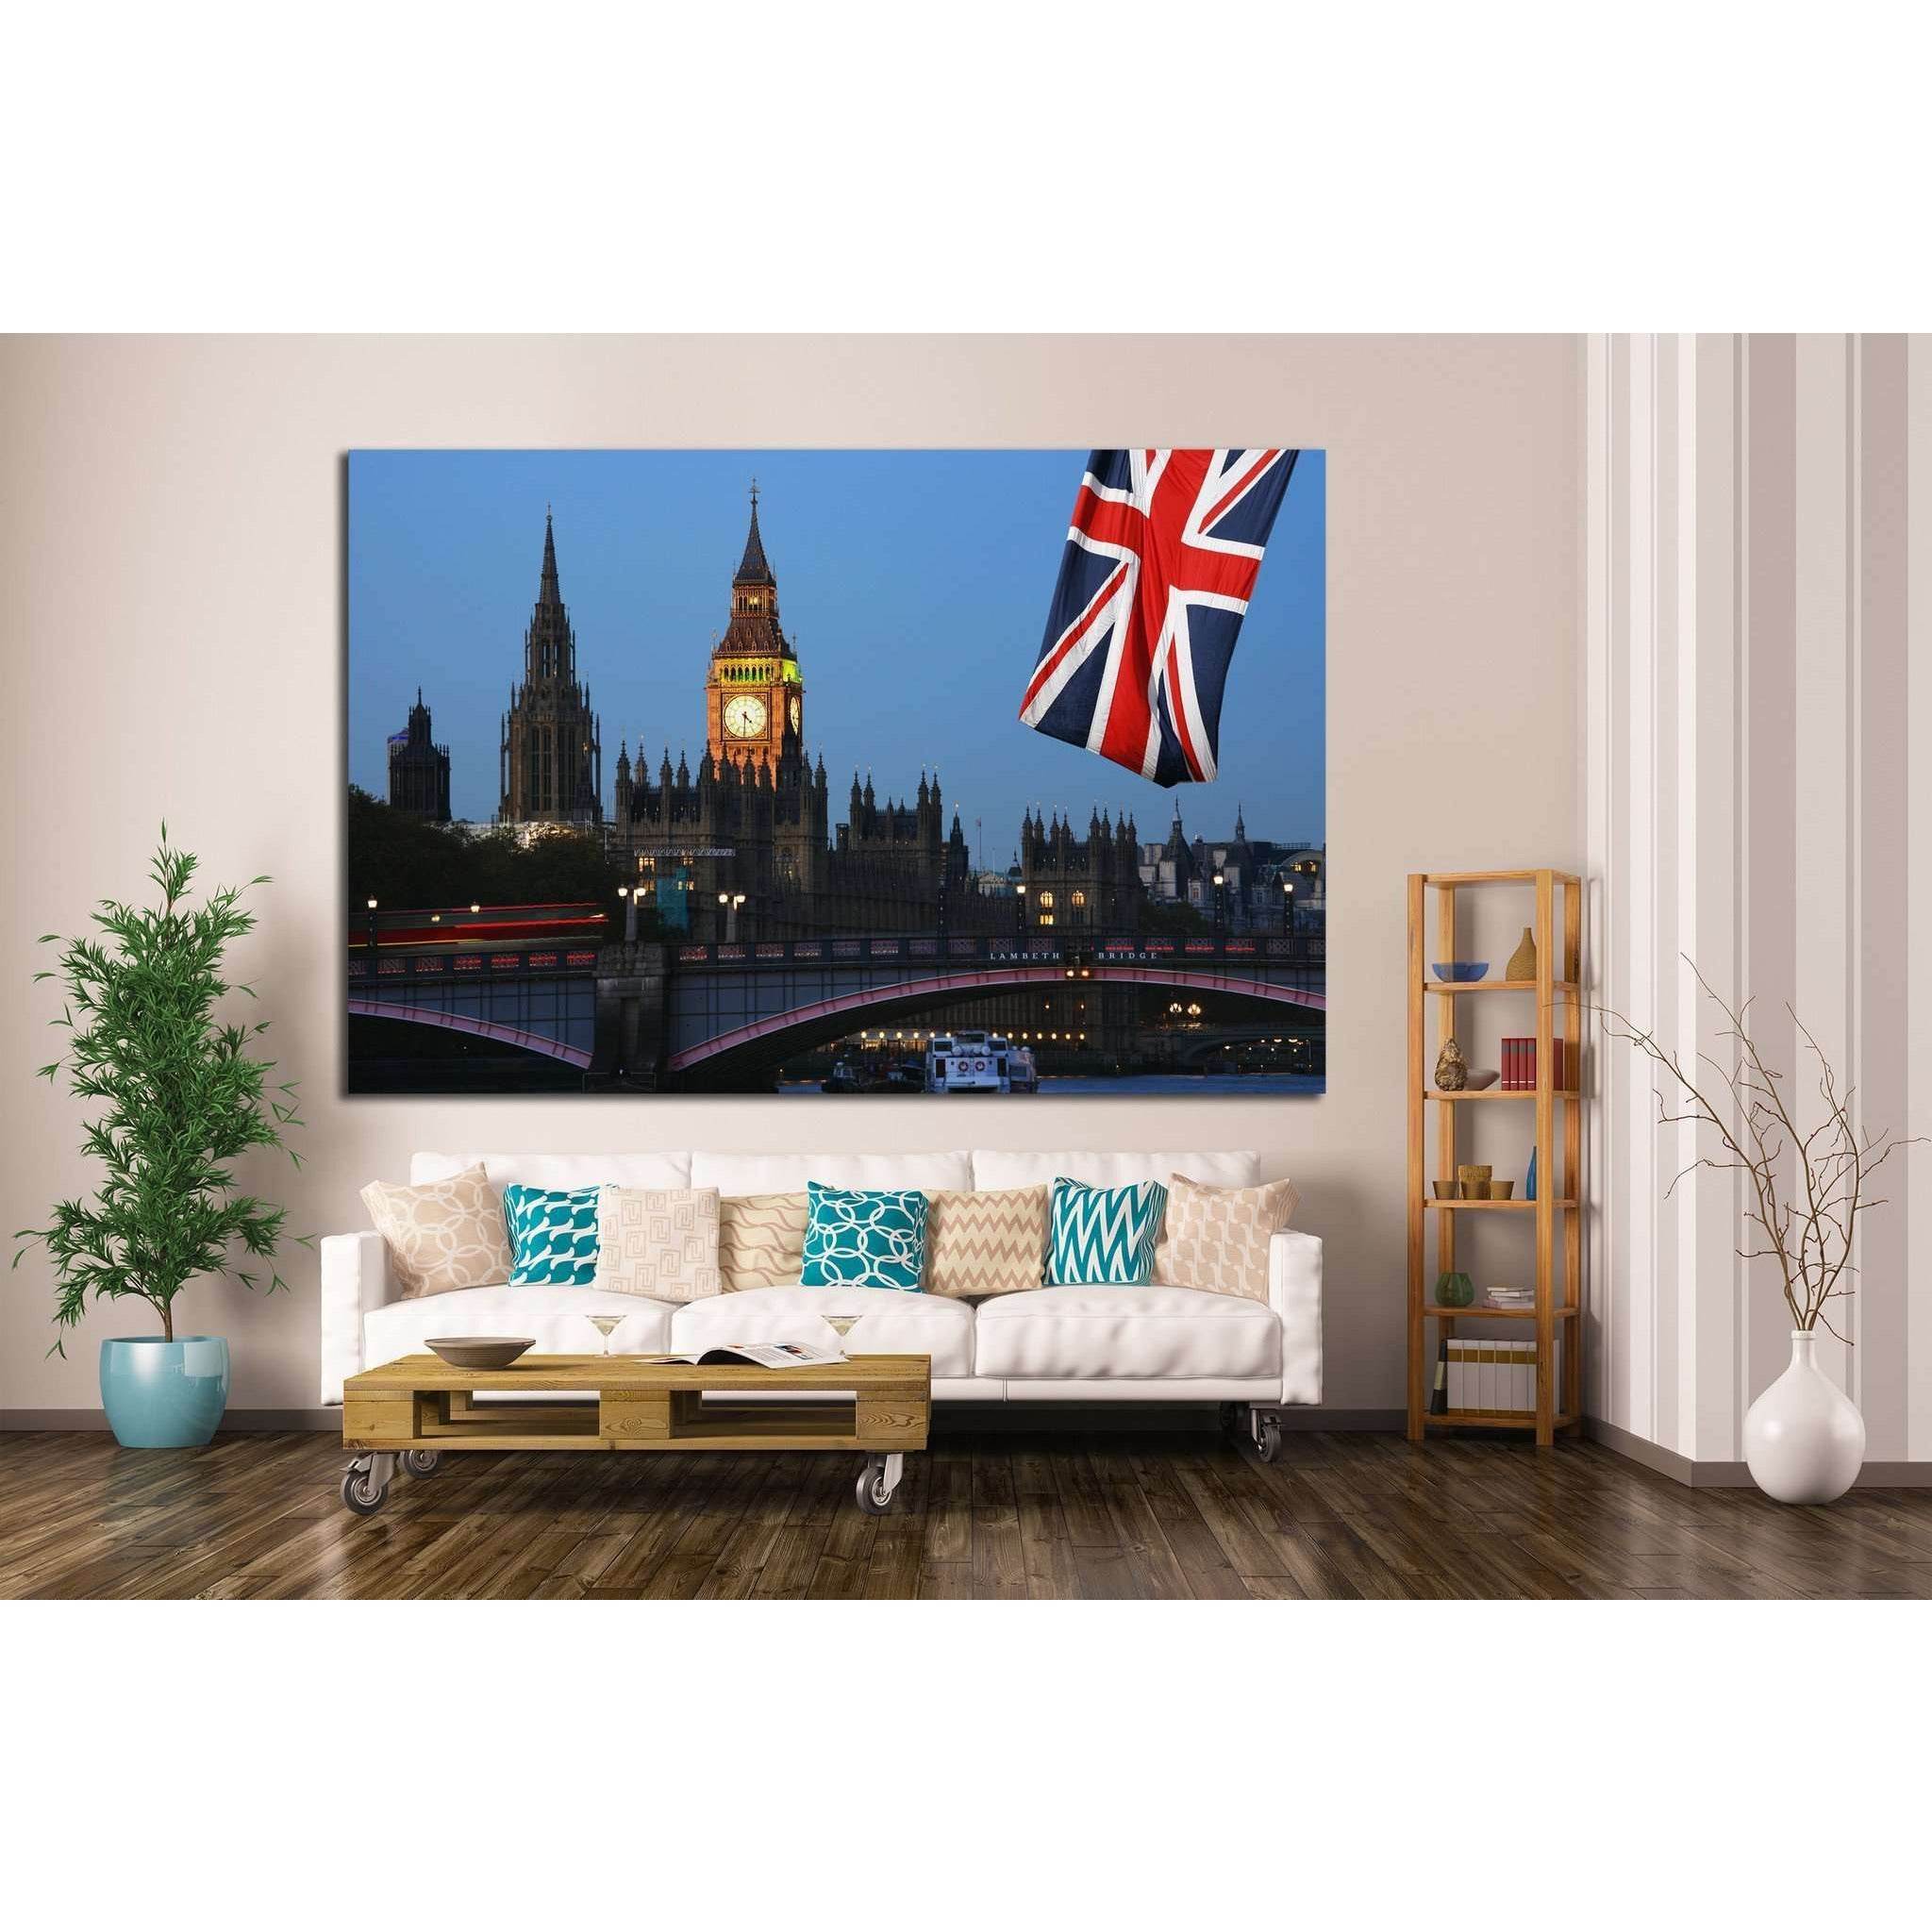 Westminster Palace, London №794 Ready to Hang Canvas Print